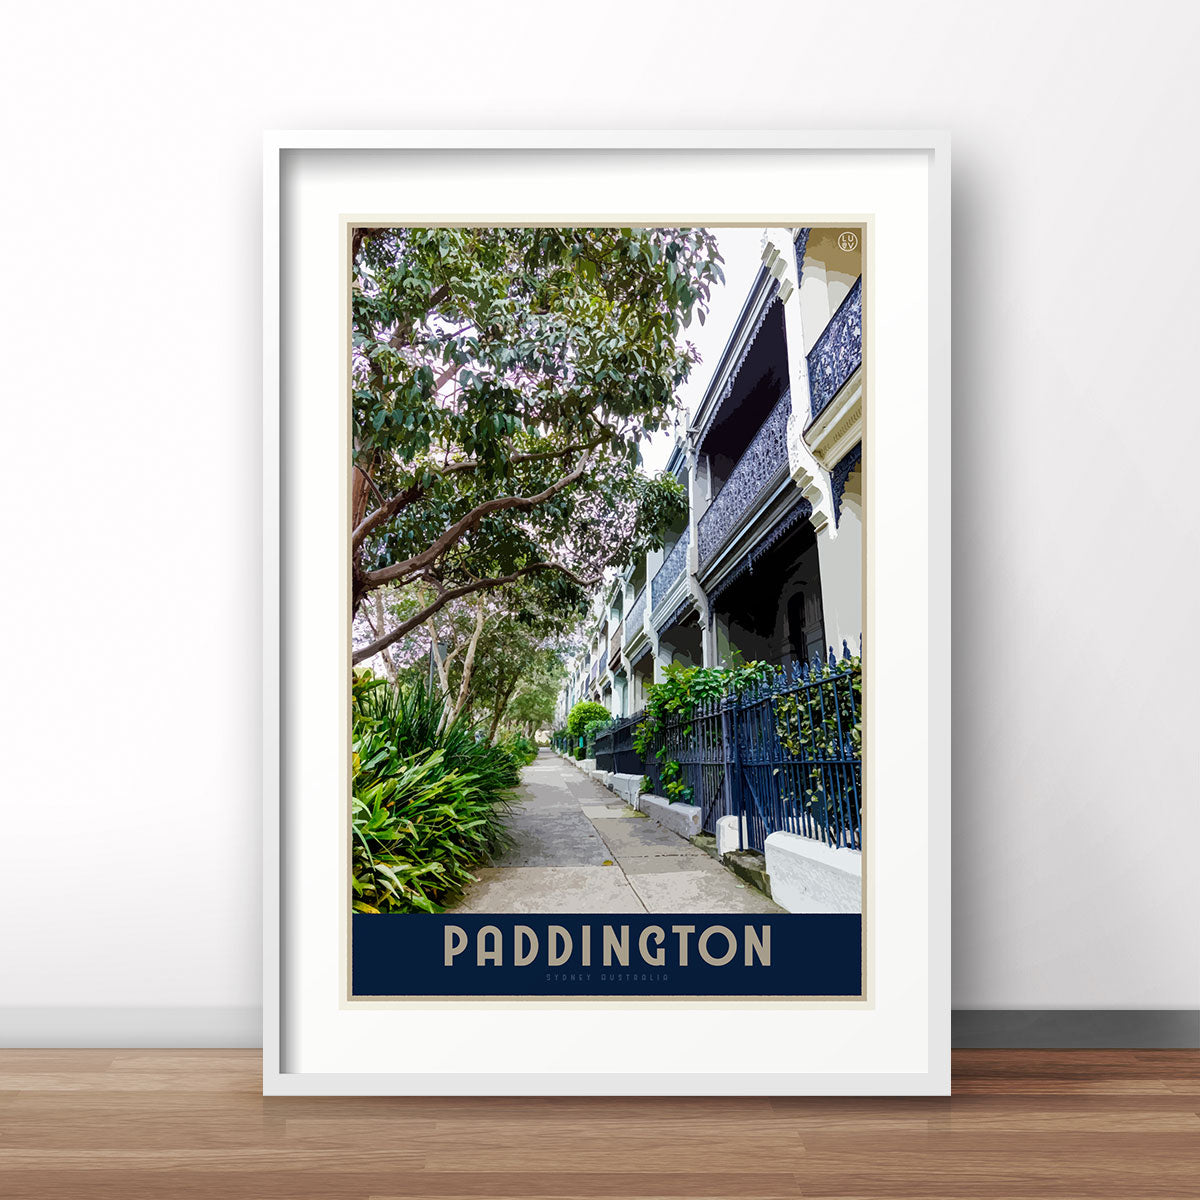 Paddington Sydney travel poster by places we luv